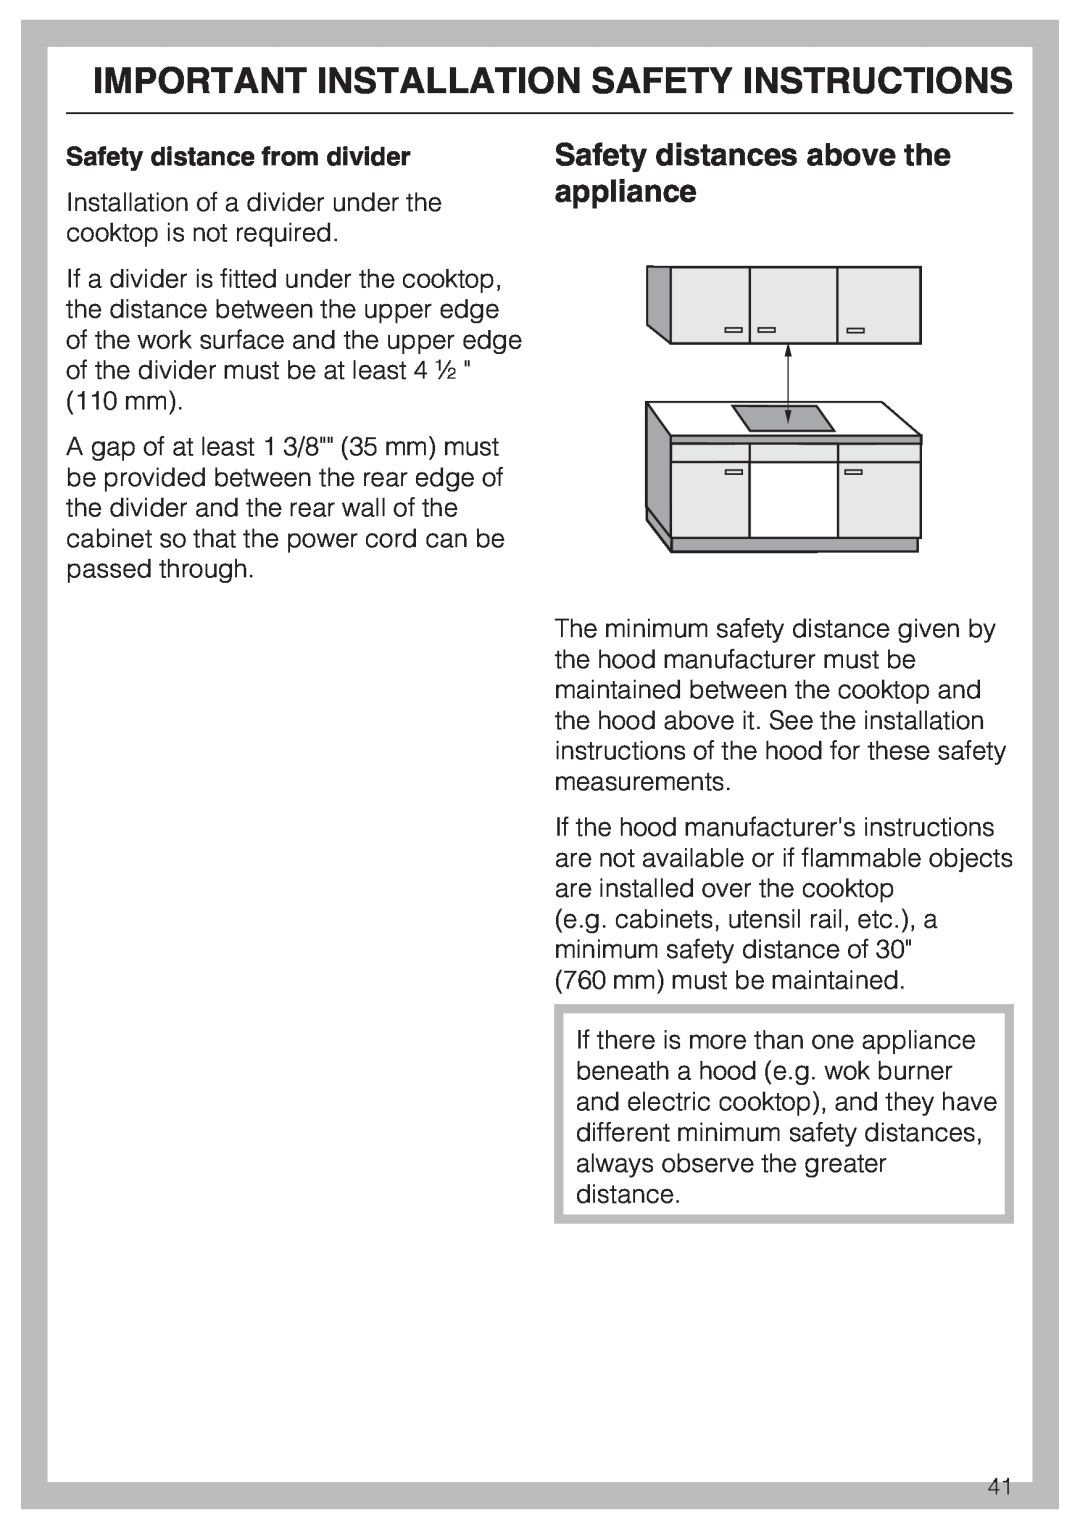 Miele KM 5840, KM 5860, KM 5880 installation instructions Safety distances above the appliance, Safety distance from divider 